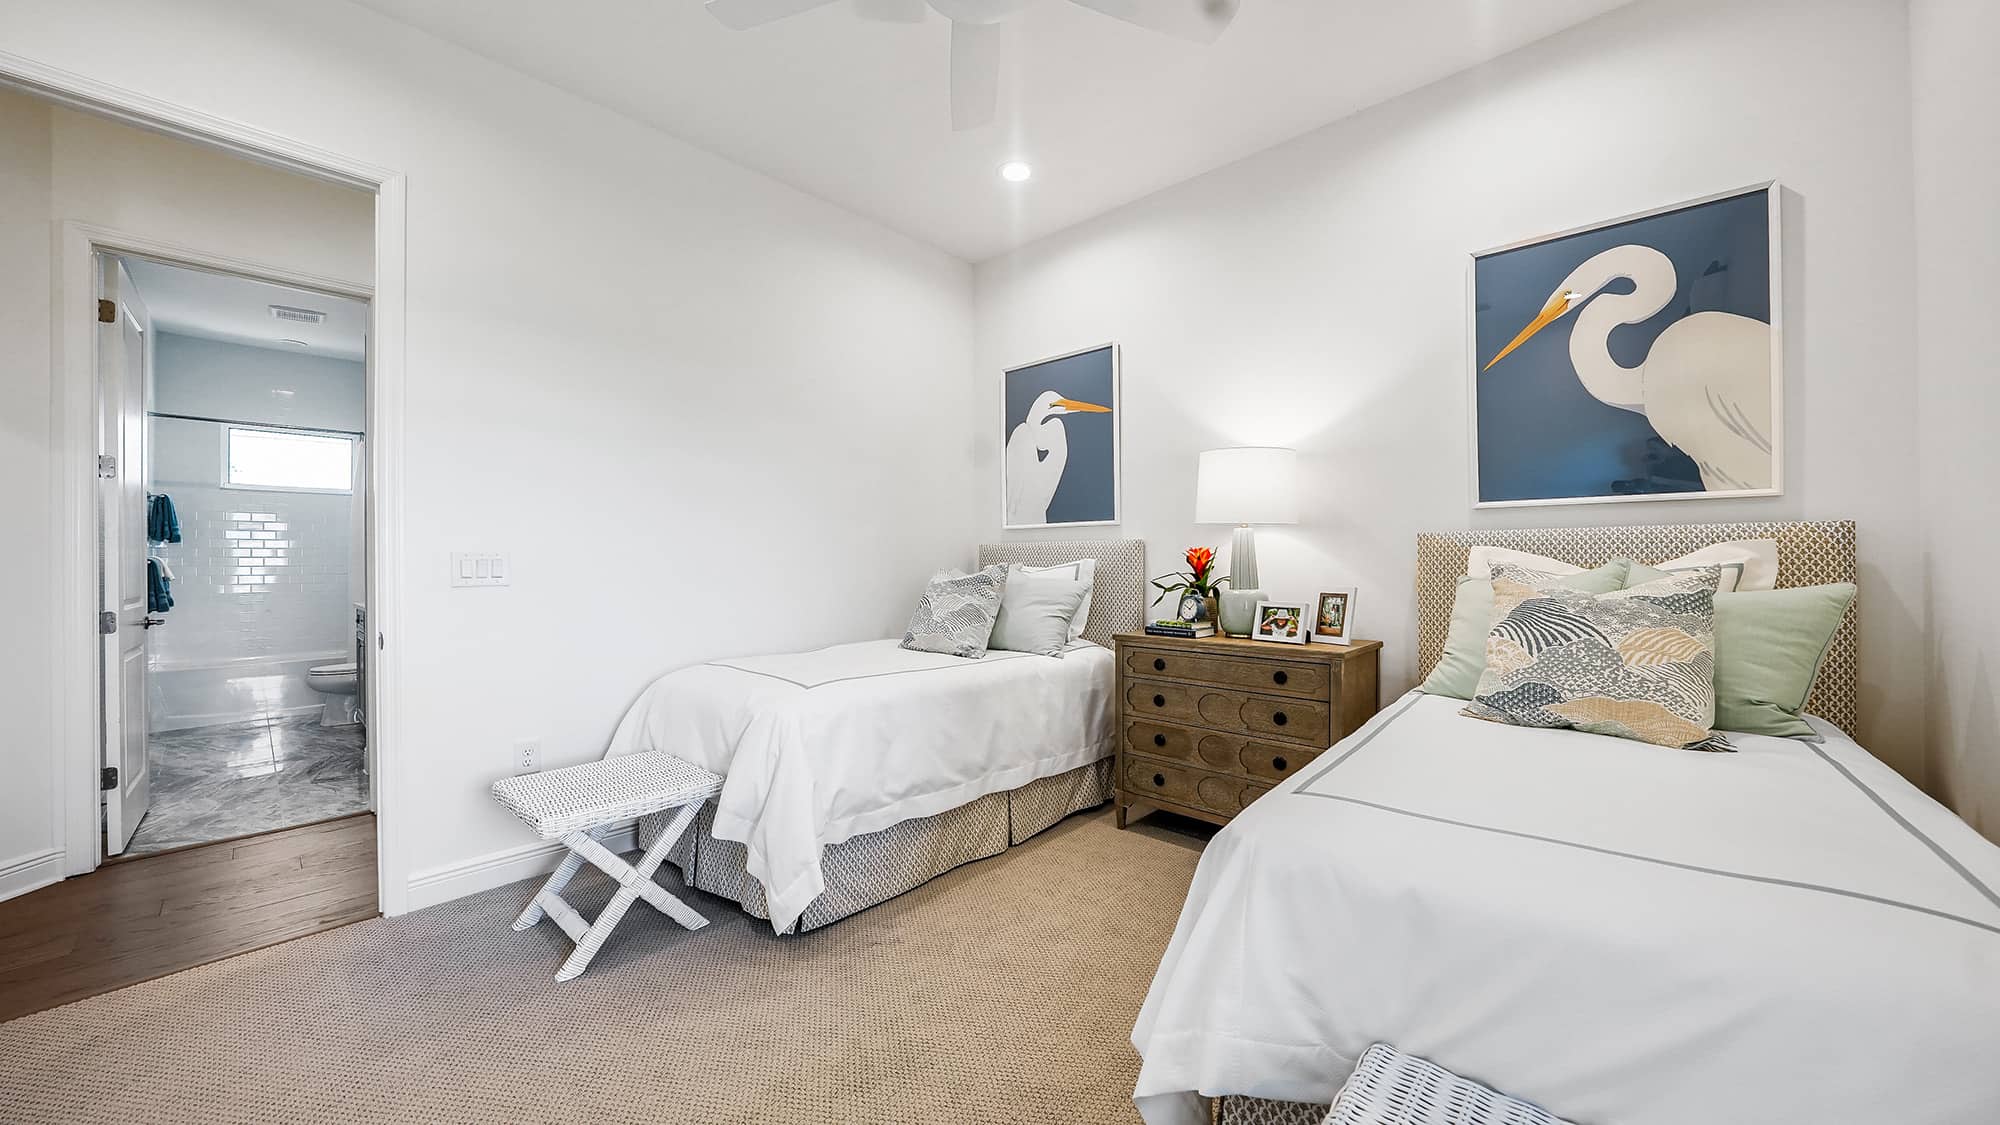 Bedroom at Sky Sail Bright Meadow by Neal Communities